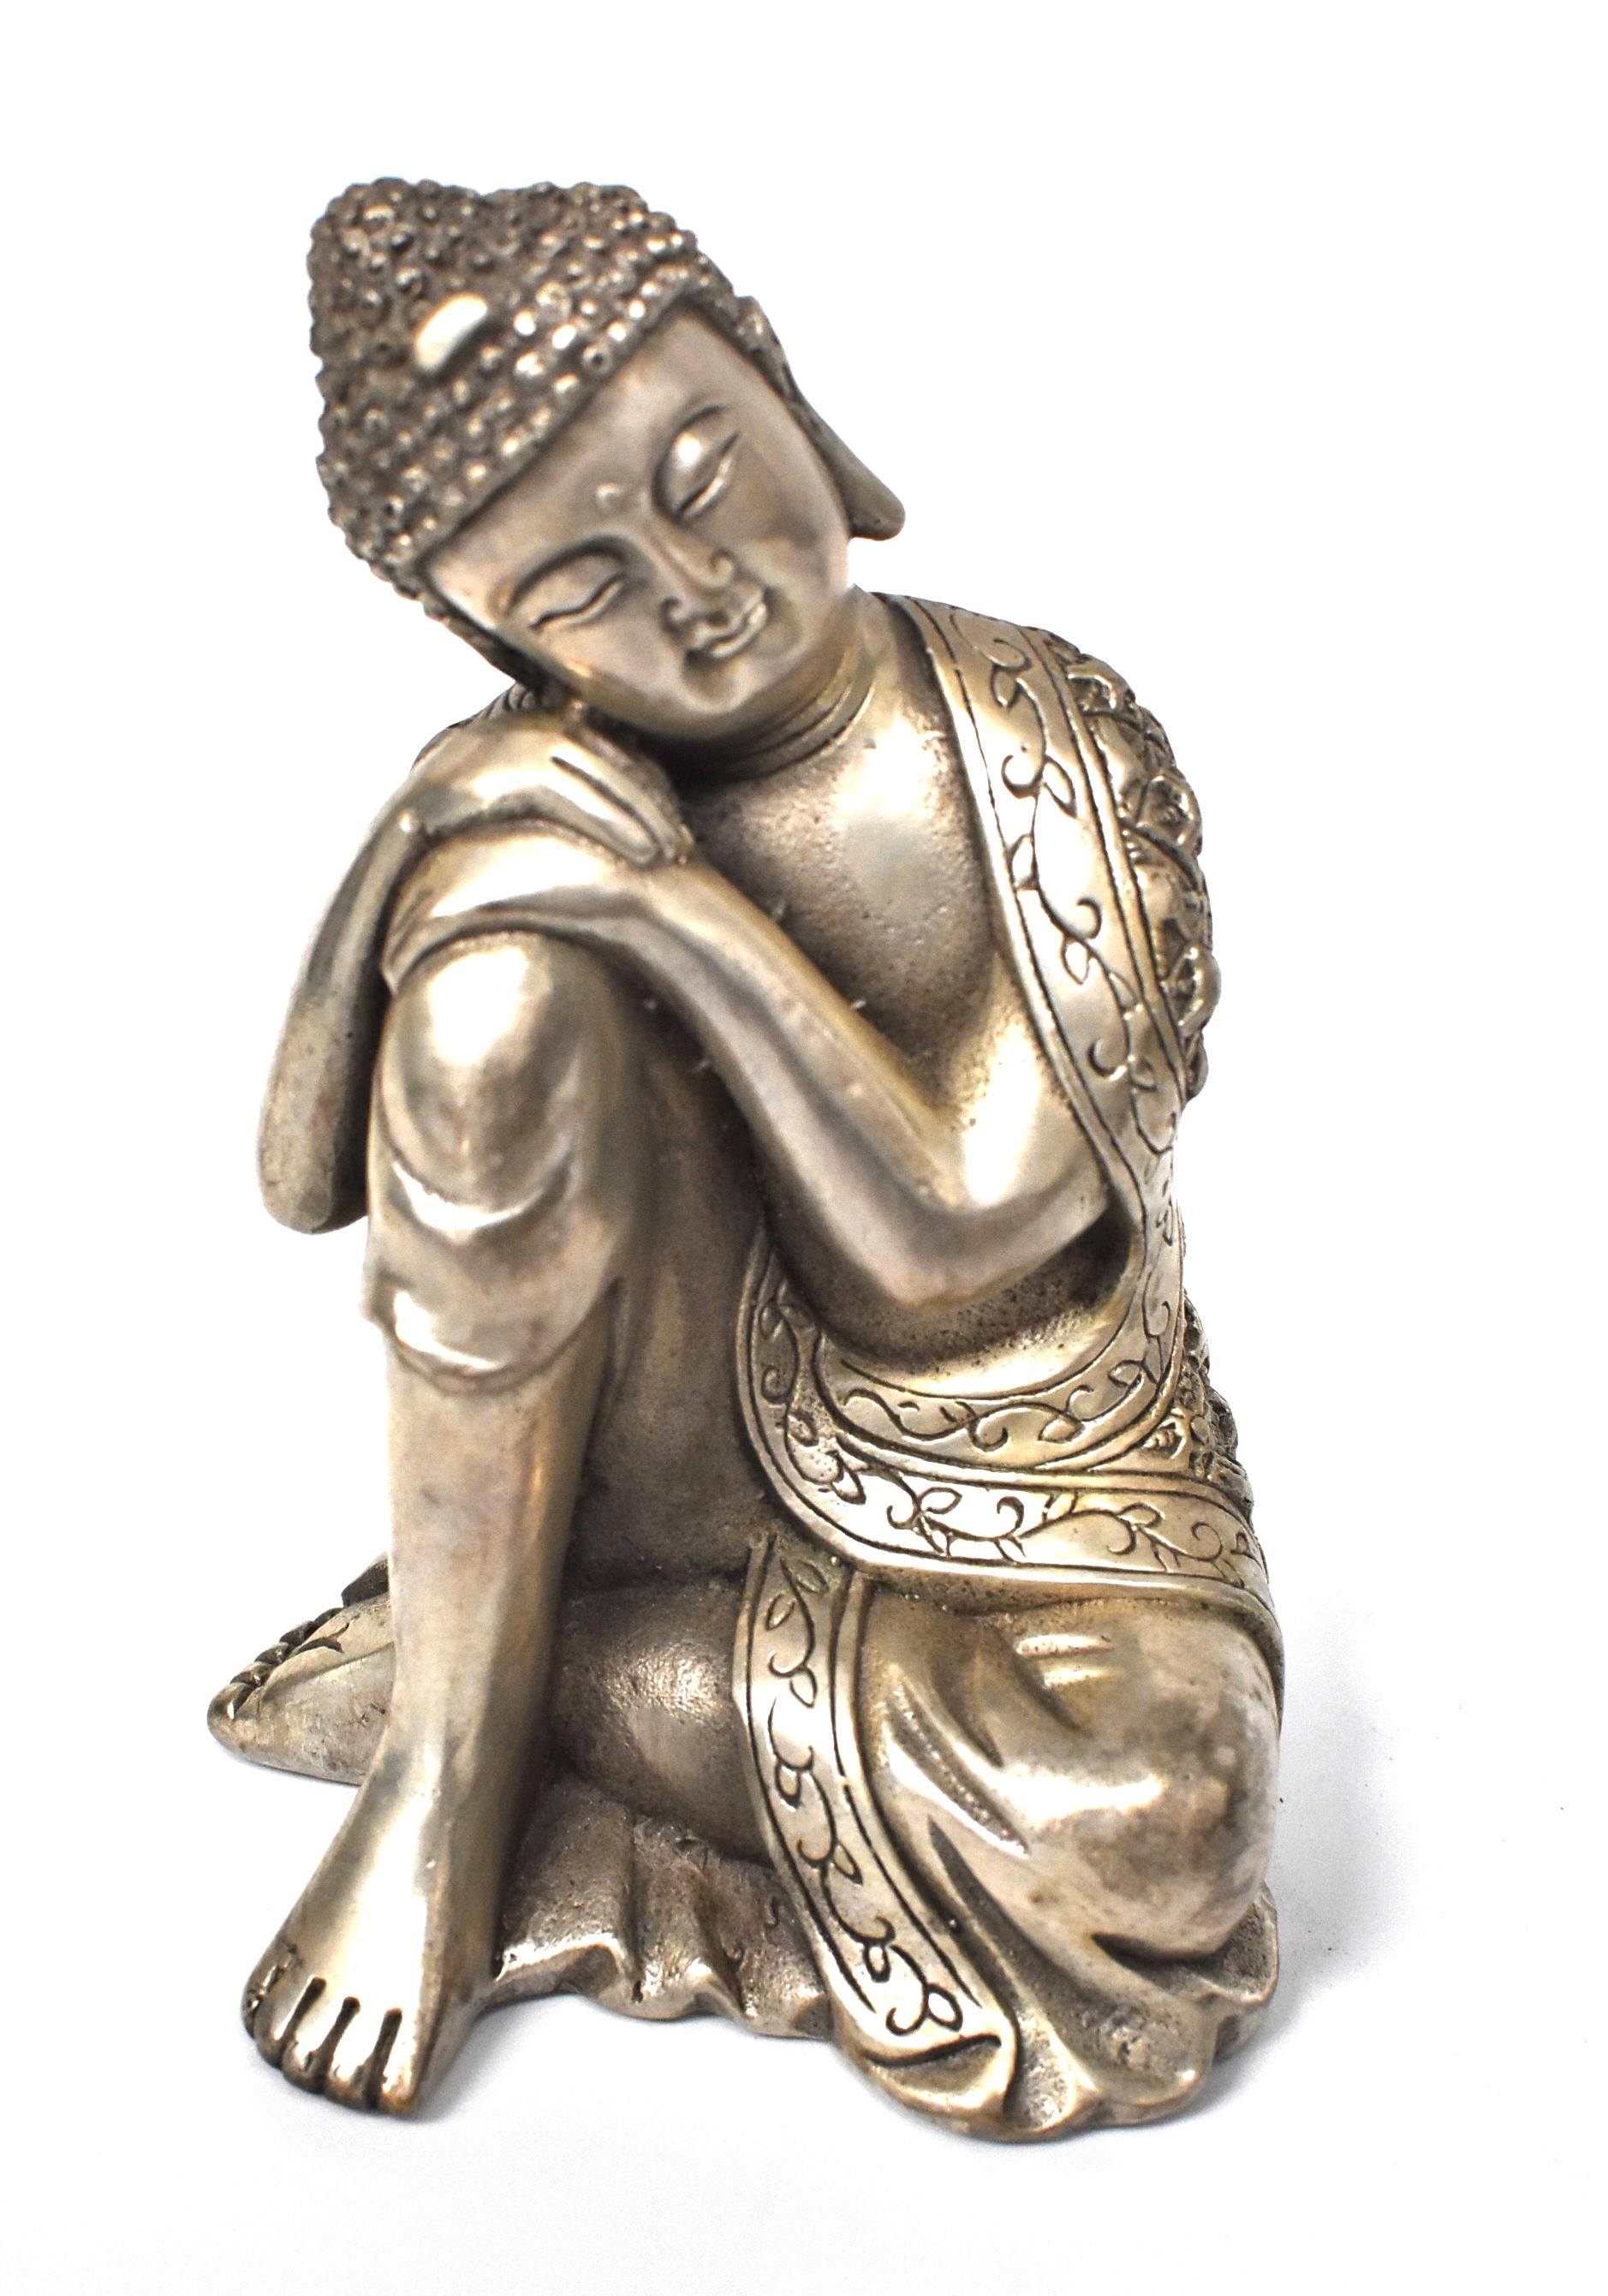 A beautiful silvered brass metal contemplative Buddha. This is a rare version of Buddha depiction, in an unique style. The Buddha wears an elaborately embossed robe, has a full face and long ears. His expression is joyful and serene. Through fine